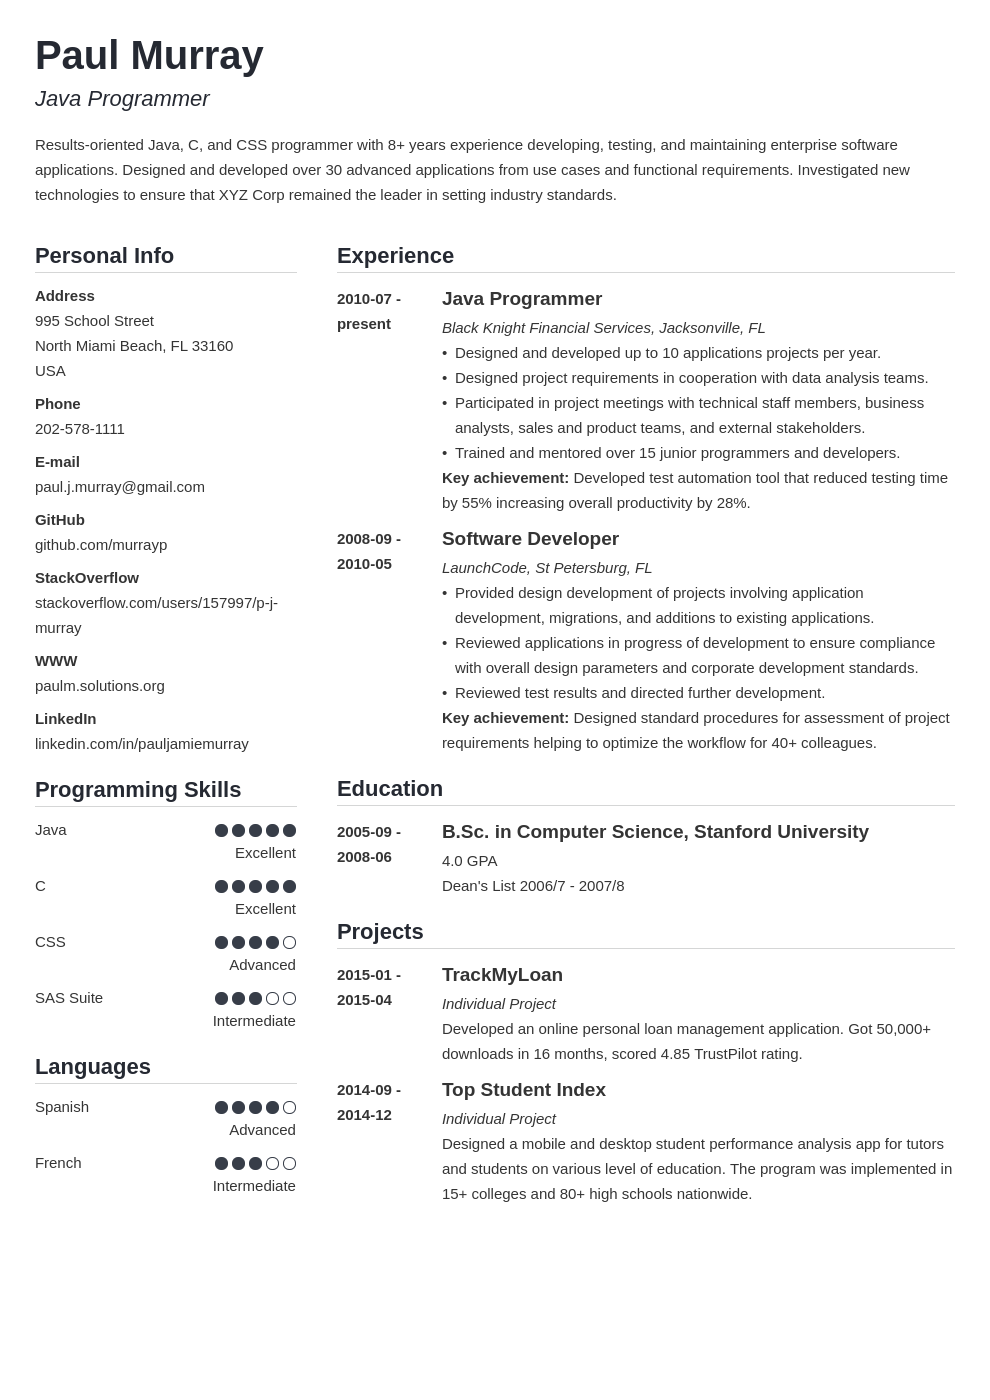 coursework projects on resume